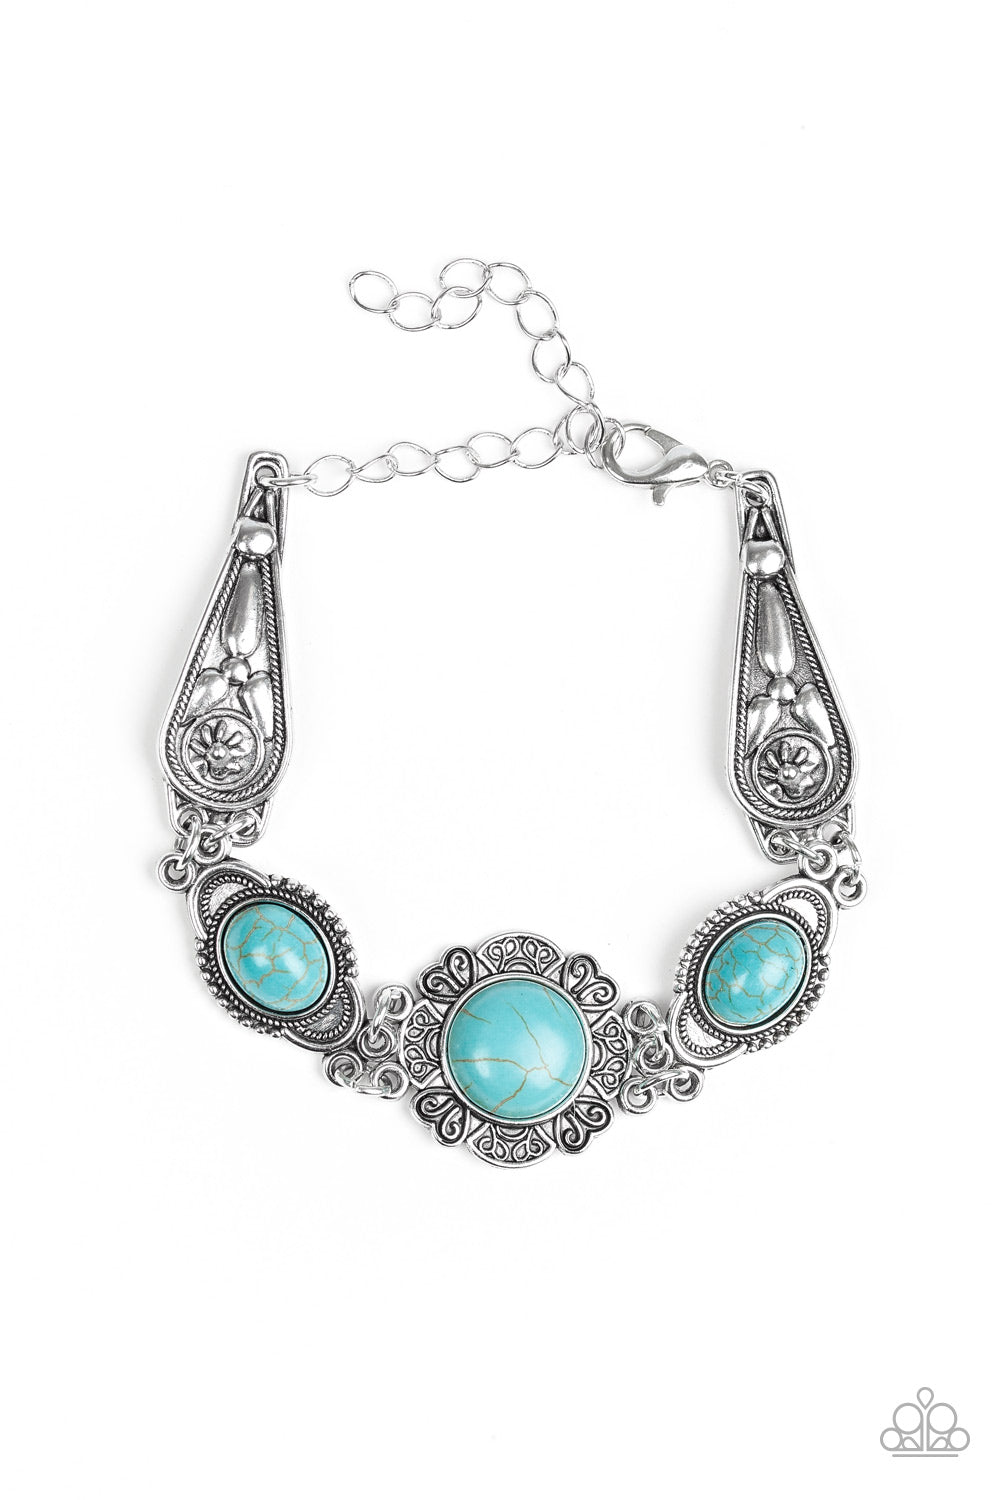 Paparazzi Serenely Southern - Blue - Turquoise Embossed Filigree - Silver Bracelet - $5 Jewelry with Ashley Swint